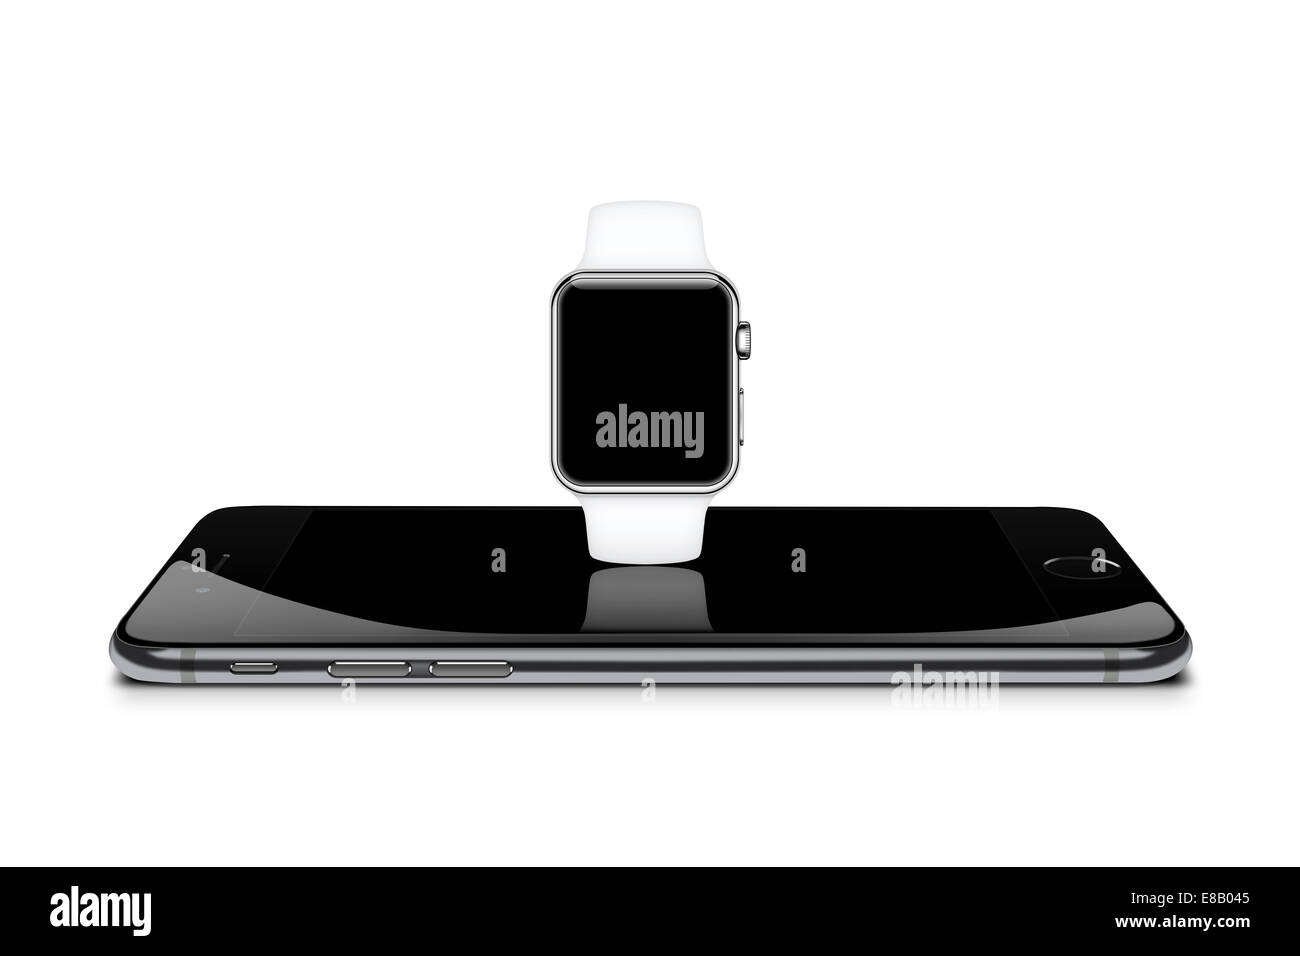 Apple watch white reflected on iphone 6 space gray, digitally generated image. Stock Photo